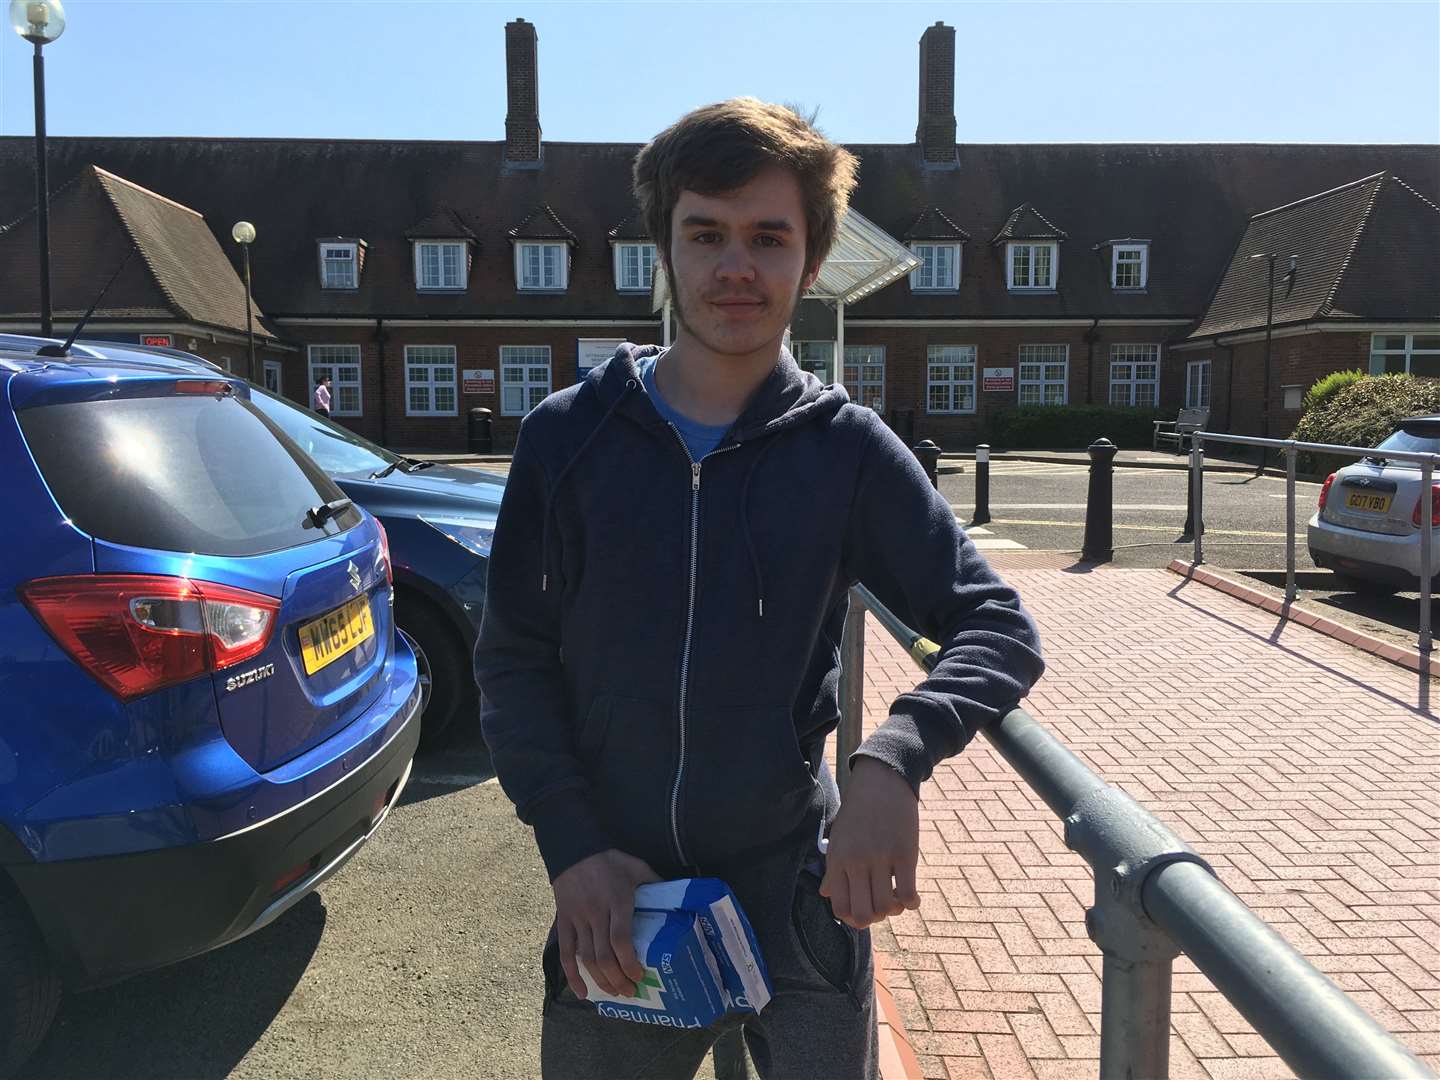 Alex Brightman, 17, went to pick up his medication from Sittingbourne Memorial Hospital when it was shut due to the threat